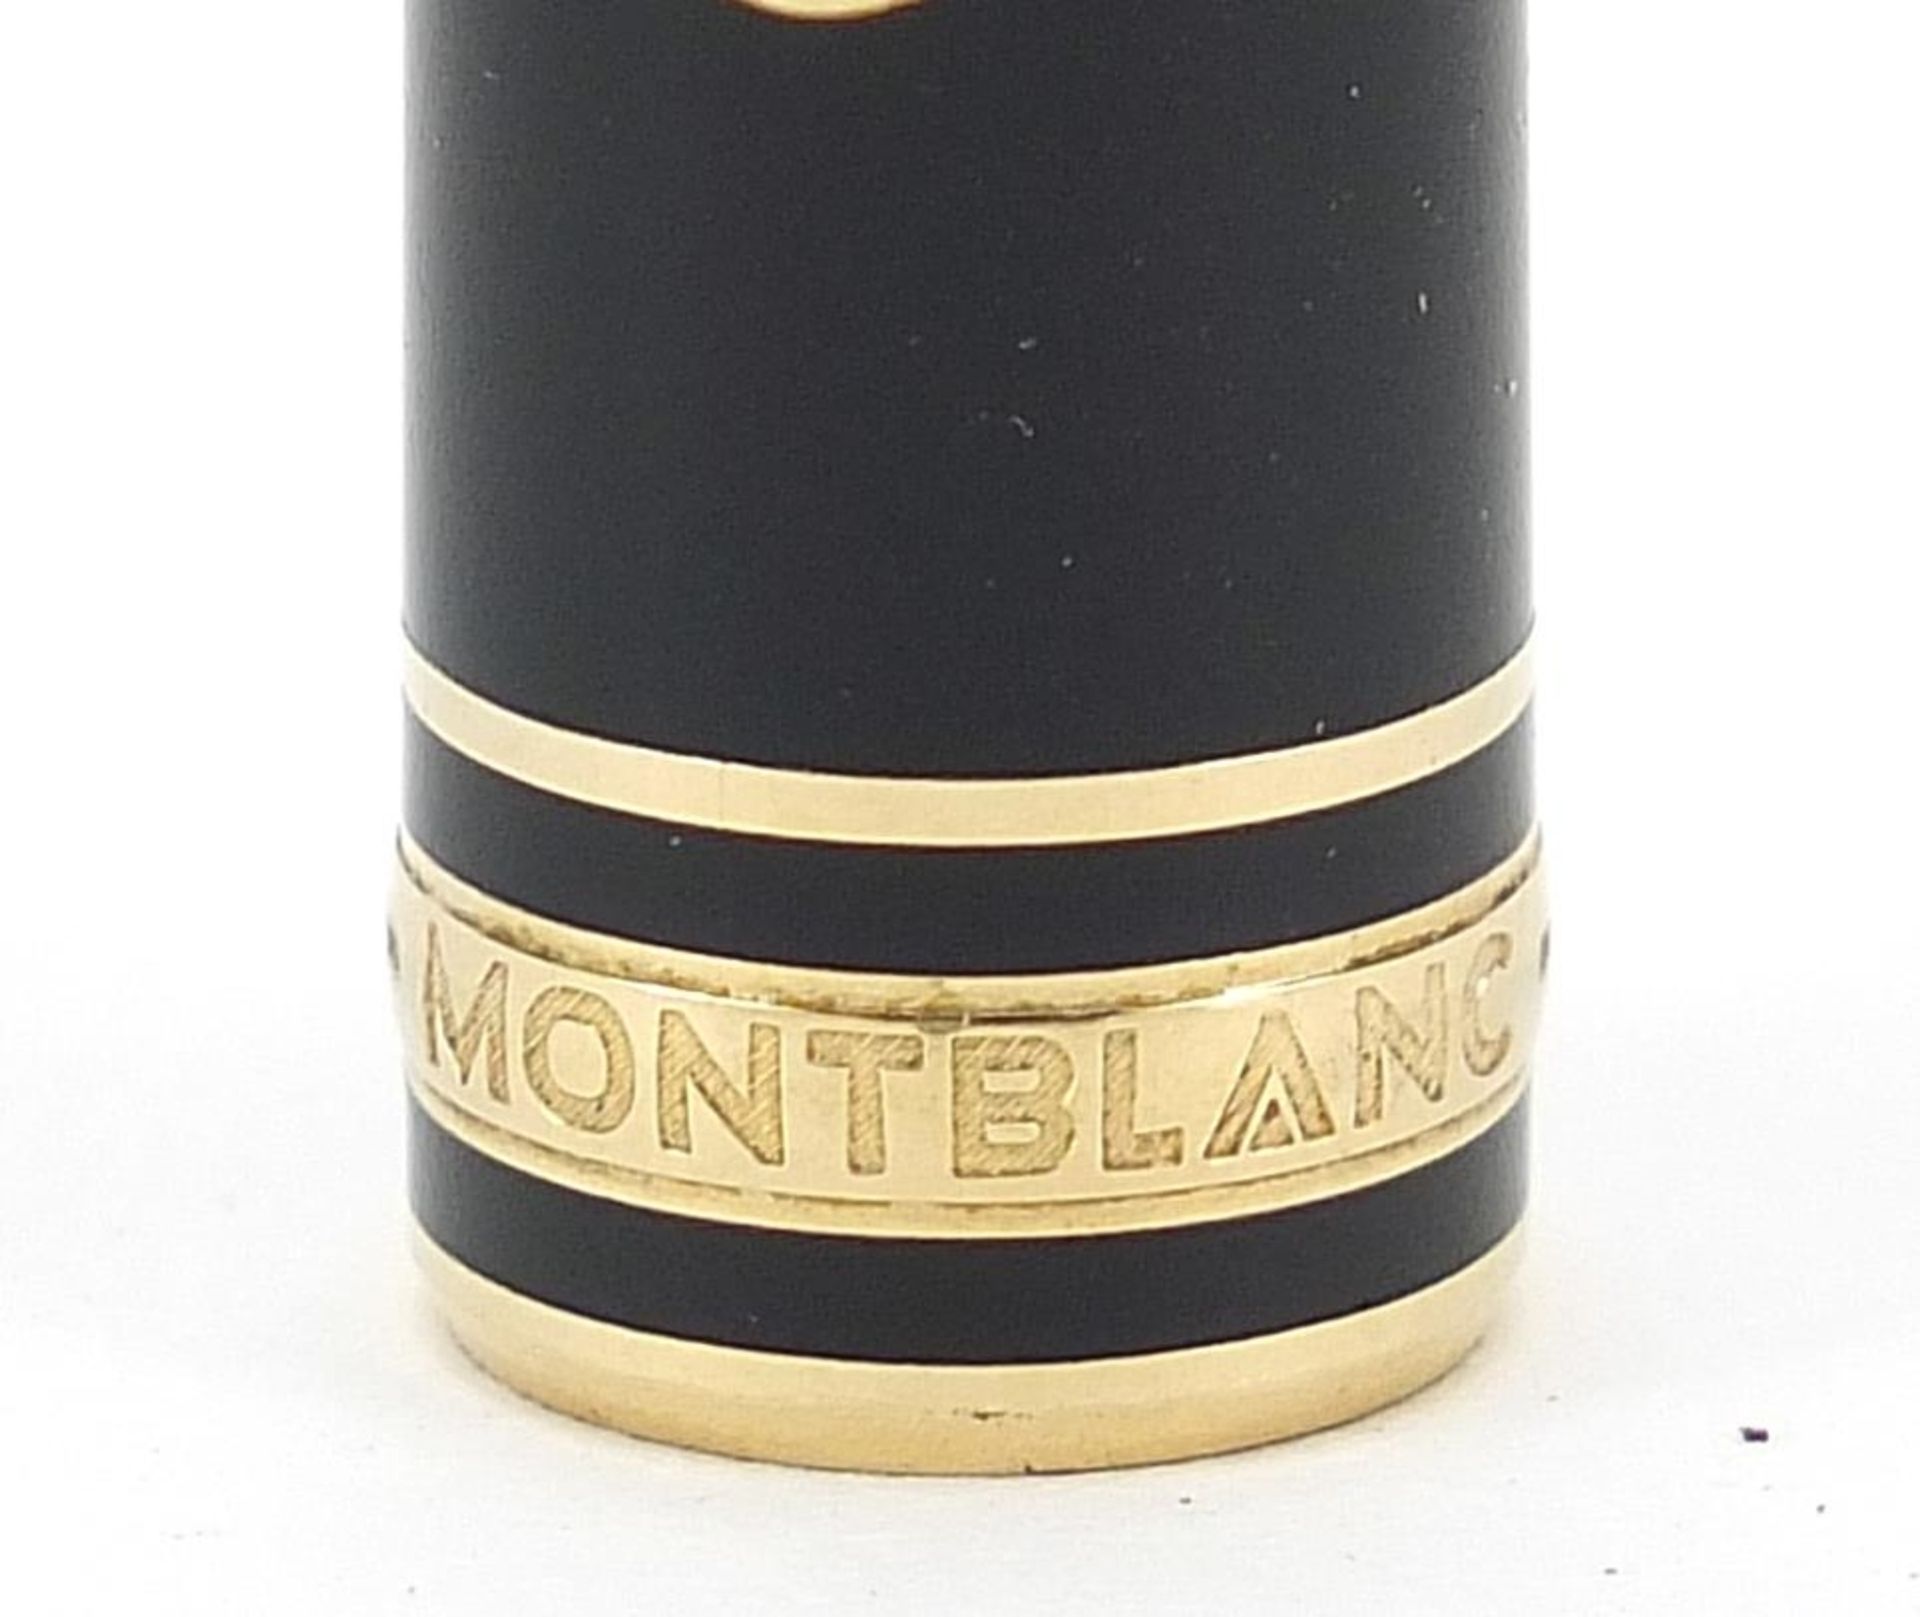 Montblanc Meisterstuck fountain pen with 14k gold nib numbered 4810, serial number PY1046185 - Bild 3 aus 5